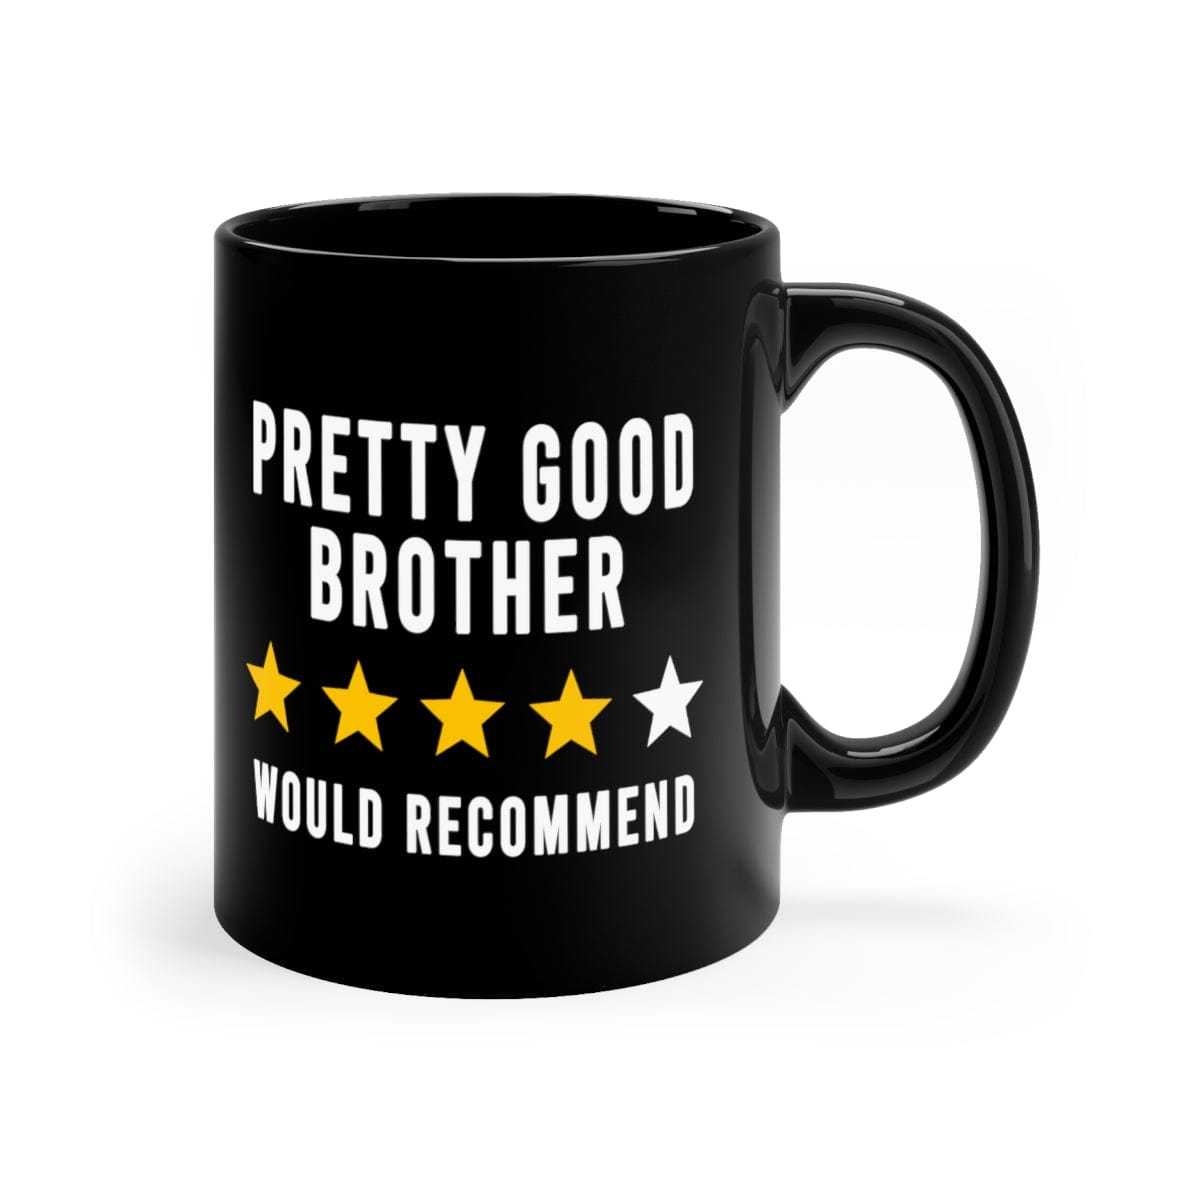 Pretty Good Brother Funny Rating Would Recommend Gift Mug 11oz